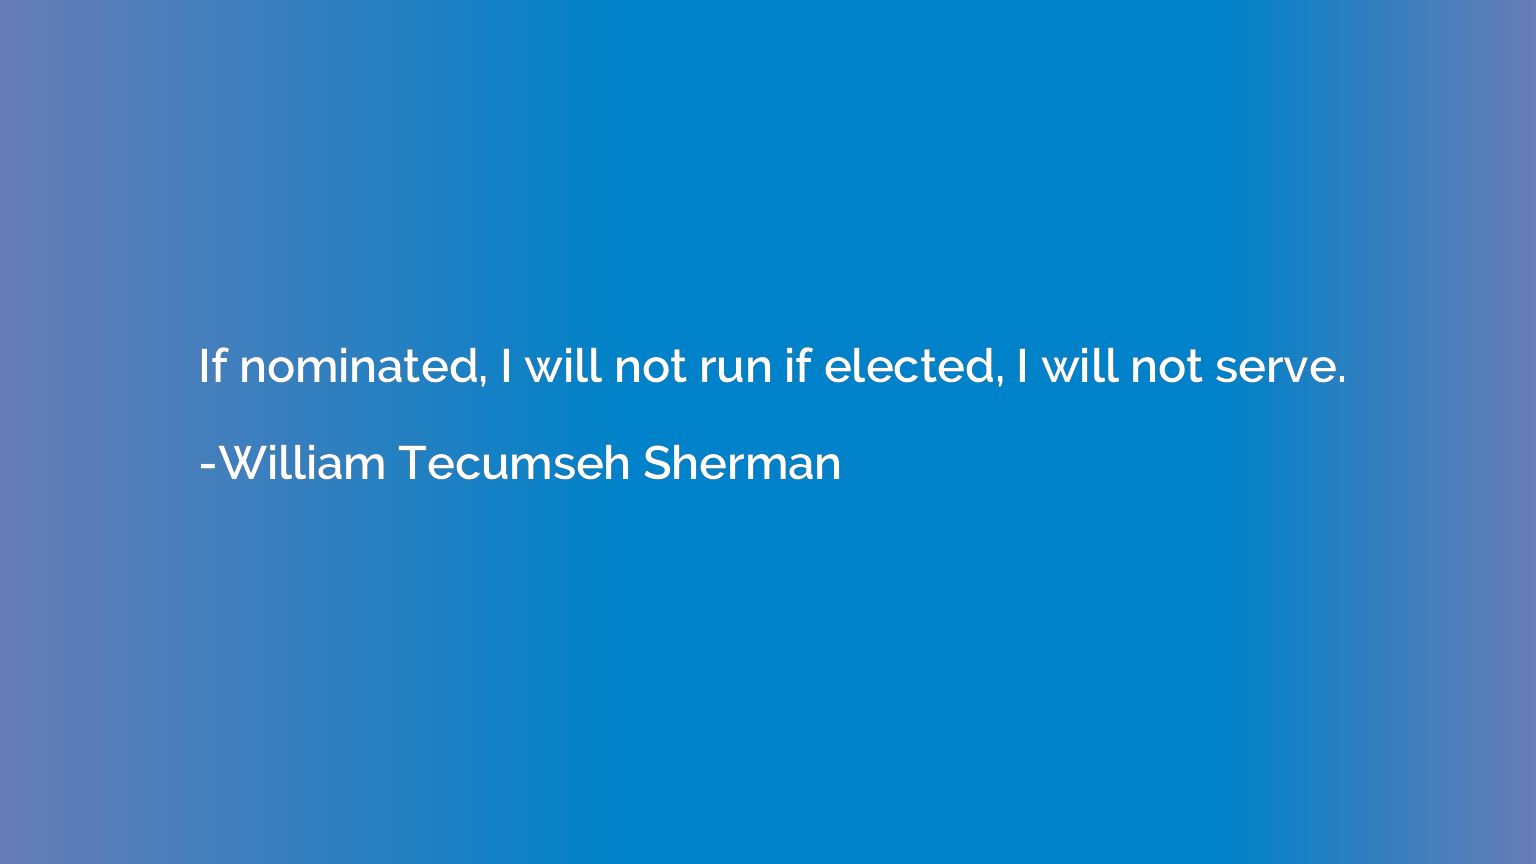 If nominated, I will not run if elected, I will not serve.